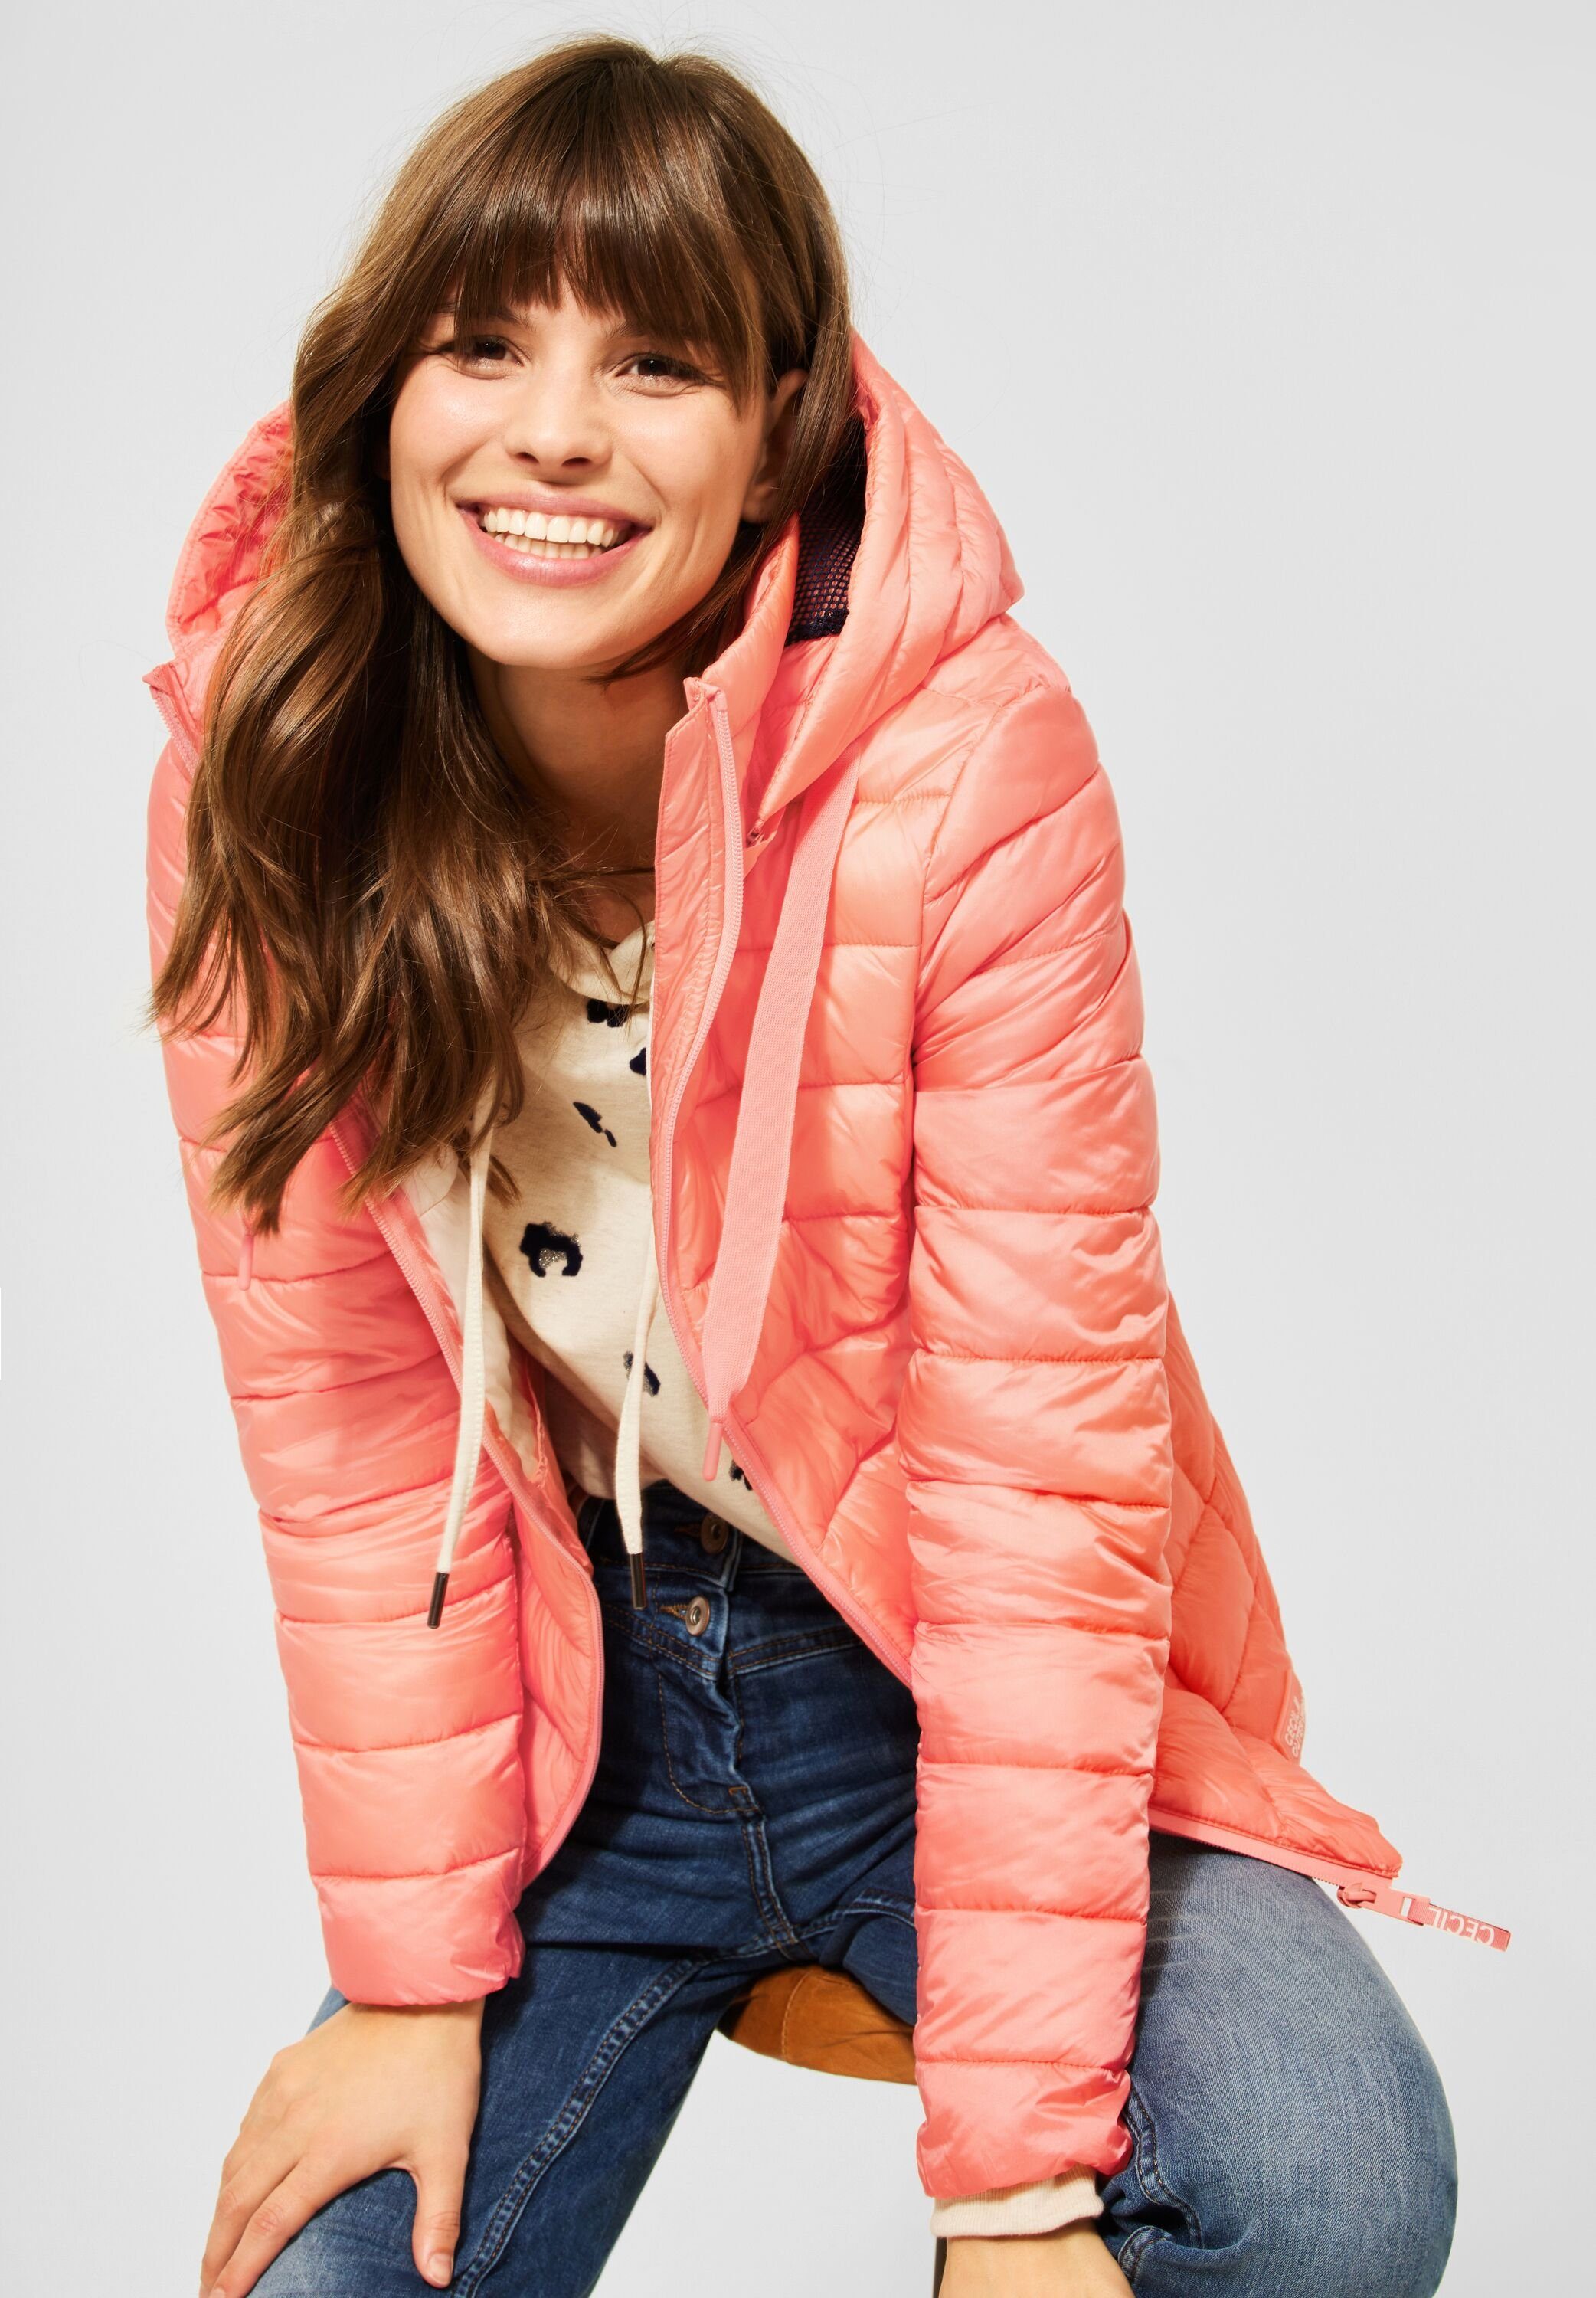 Cecil Outdoorjacke Futter Taschen, in Futter Gesteppte 100% 100% Material: Jacke 100% Nylon, Outdoor Polyester Nylon, Rose Grapefruit Cecil (1-St) Obermaterial